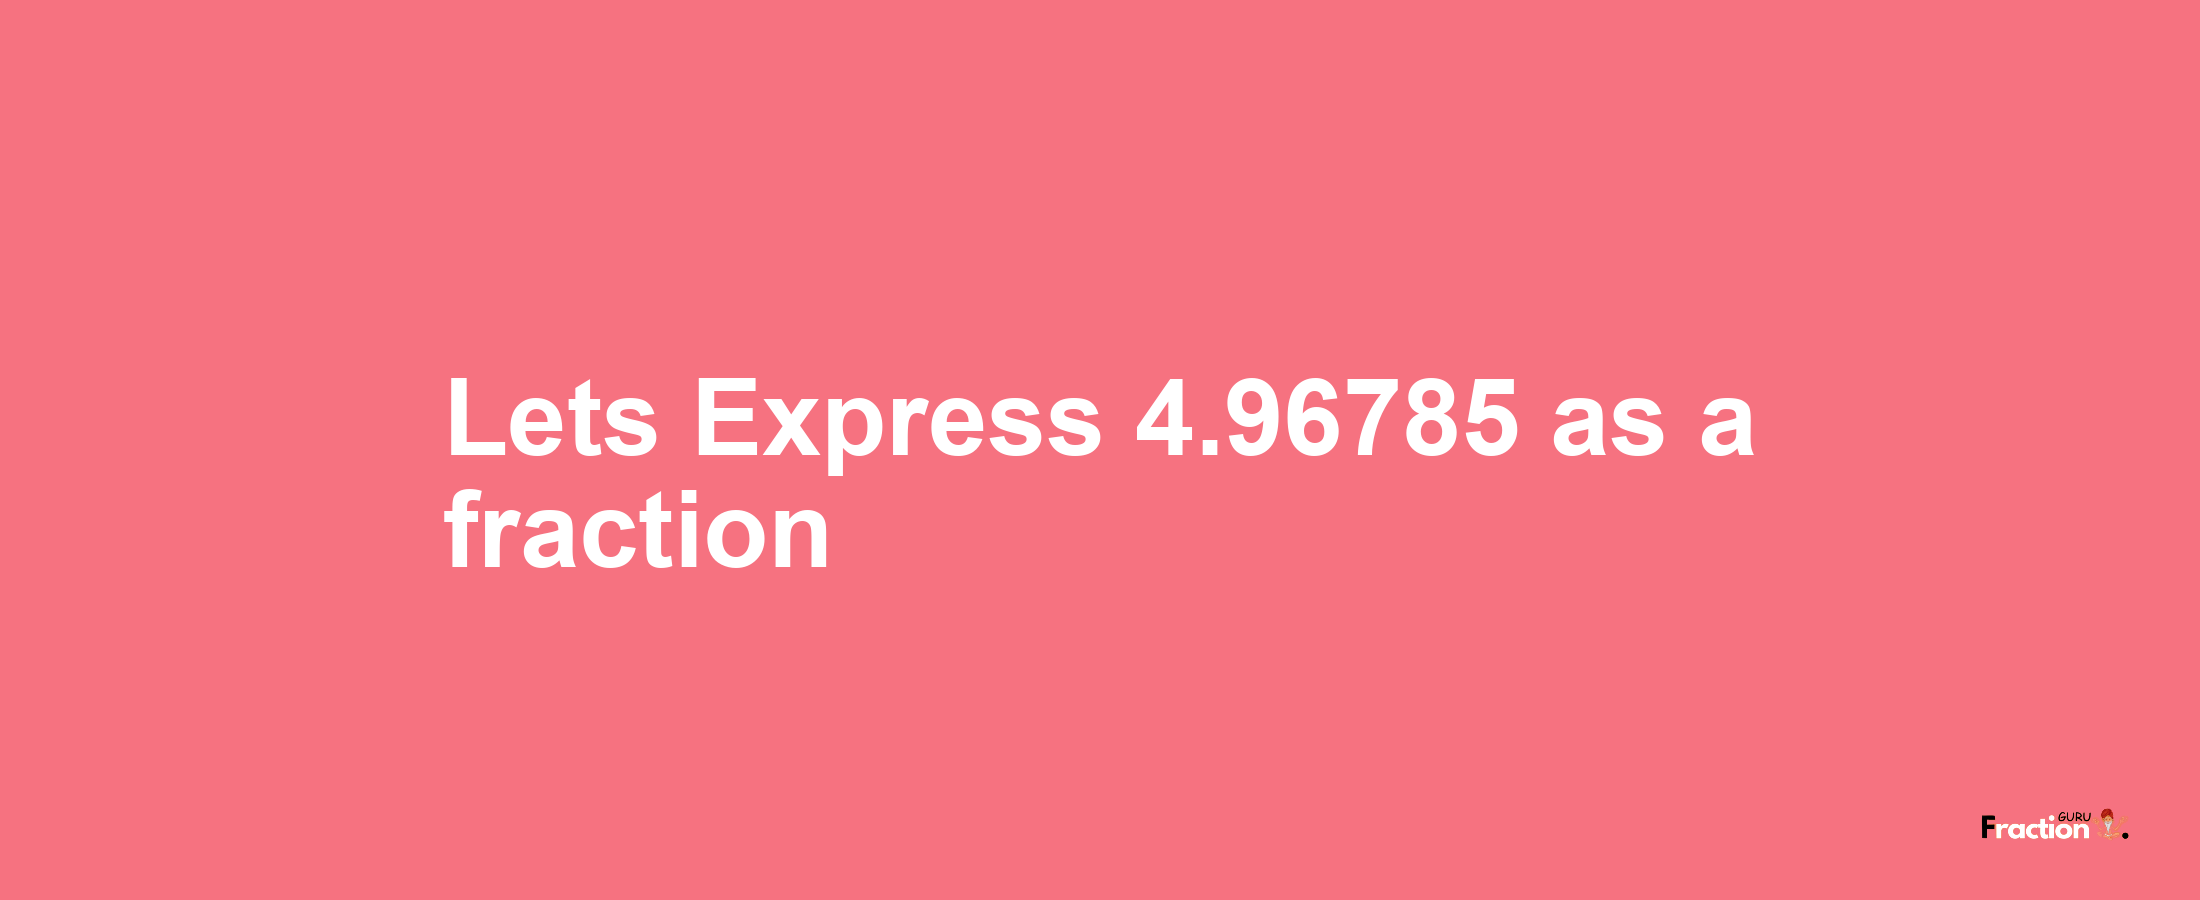 Lets Express 4.96785 as afraction